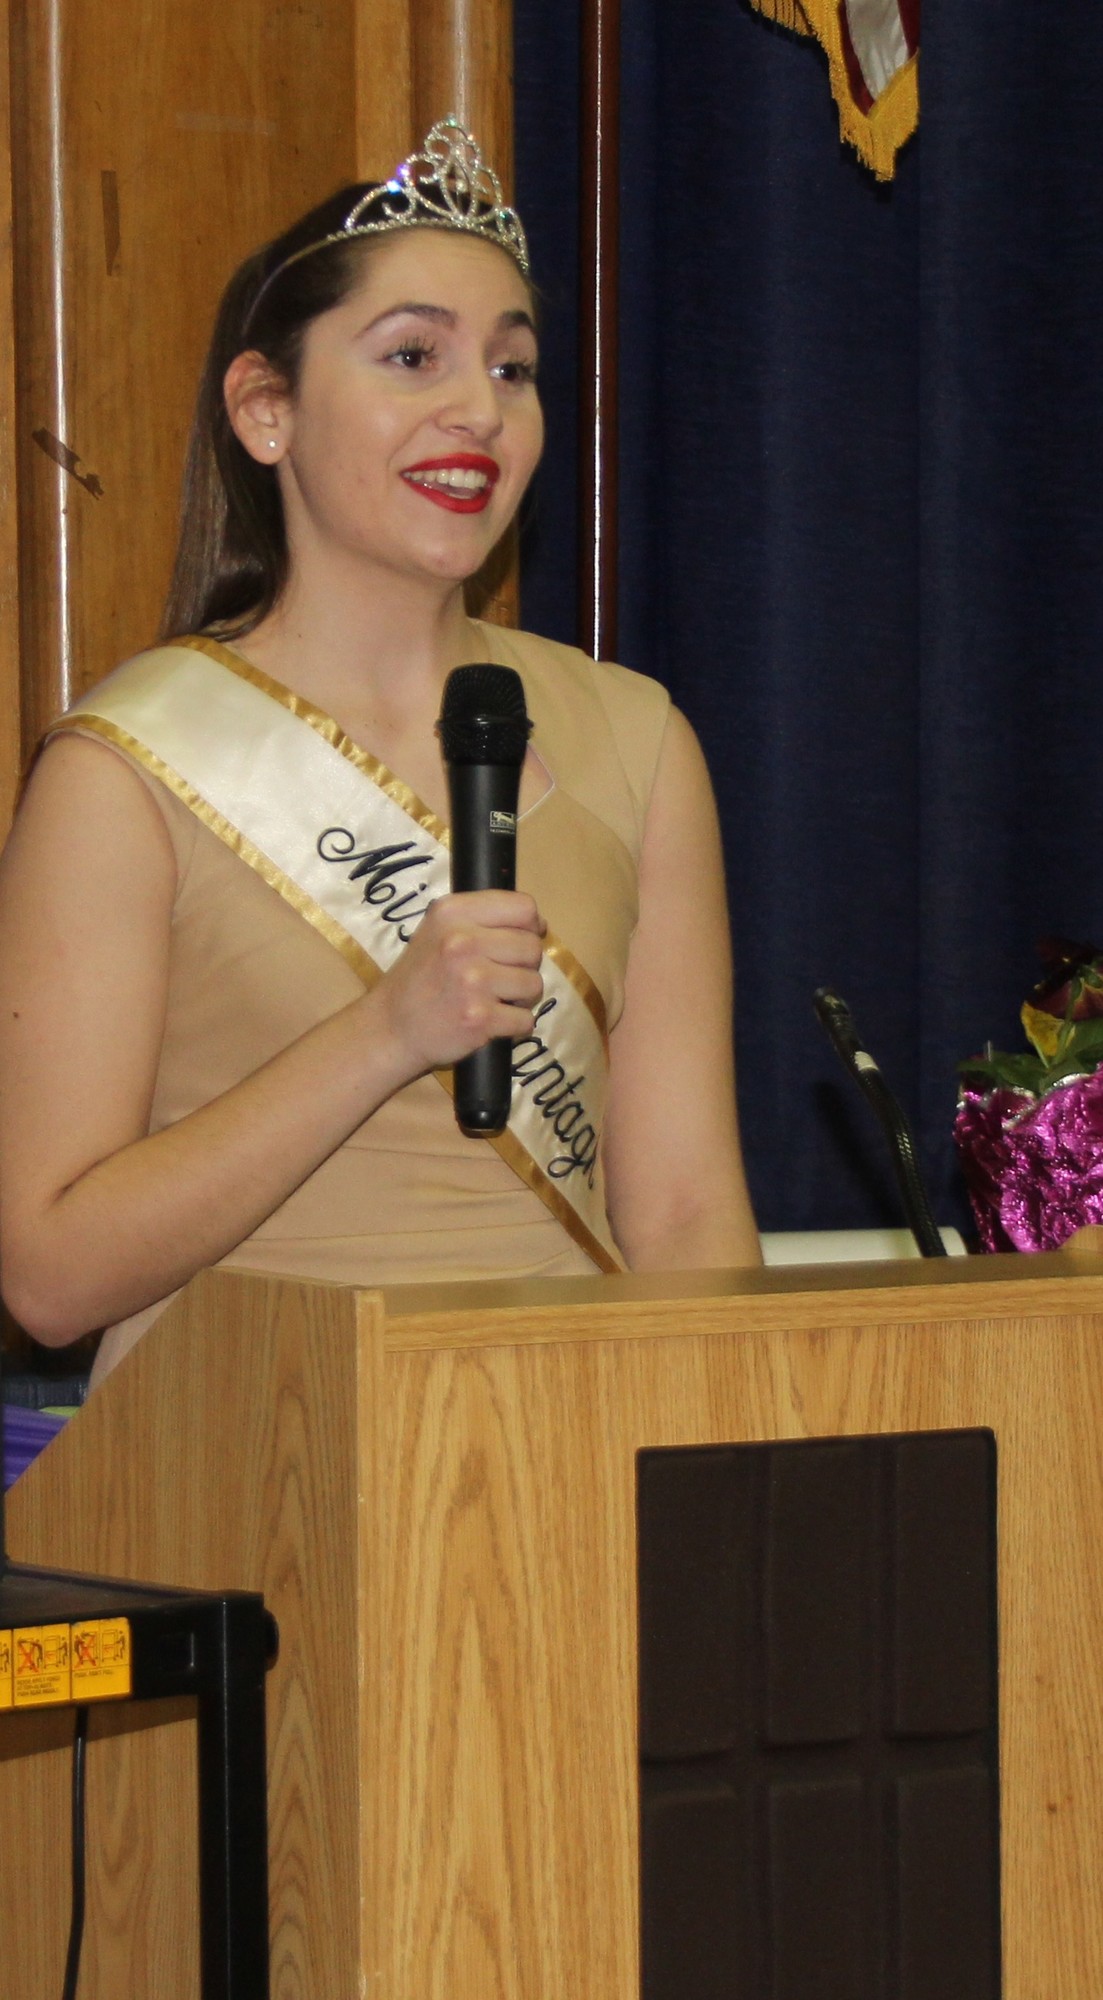 Kayla Knight, Miss Wantagh 2014, opened the ceremony.